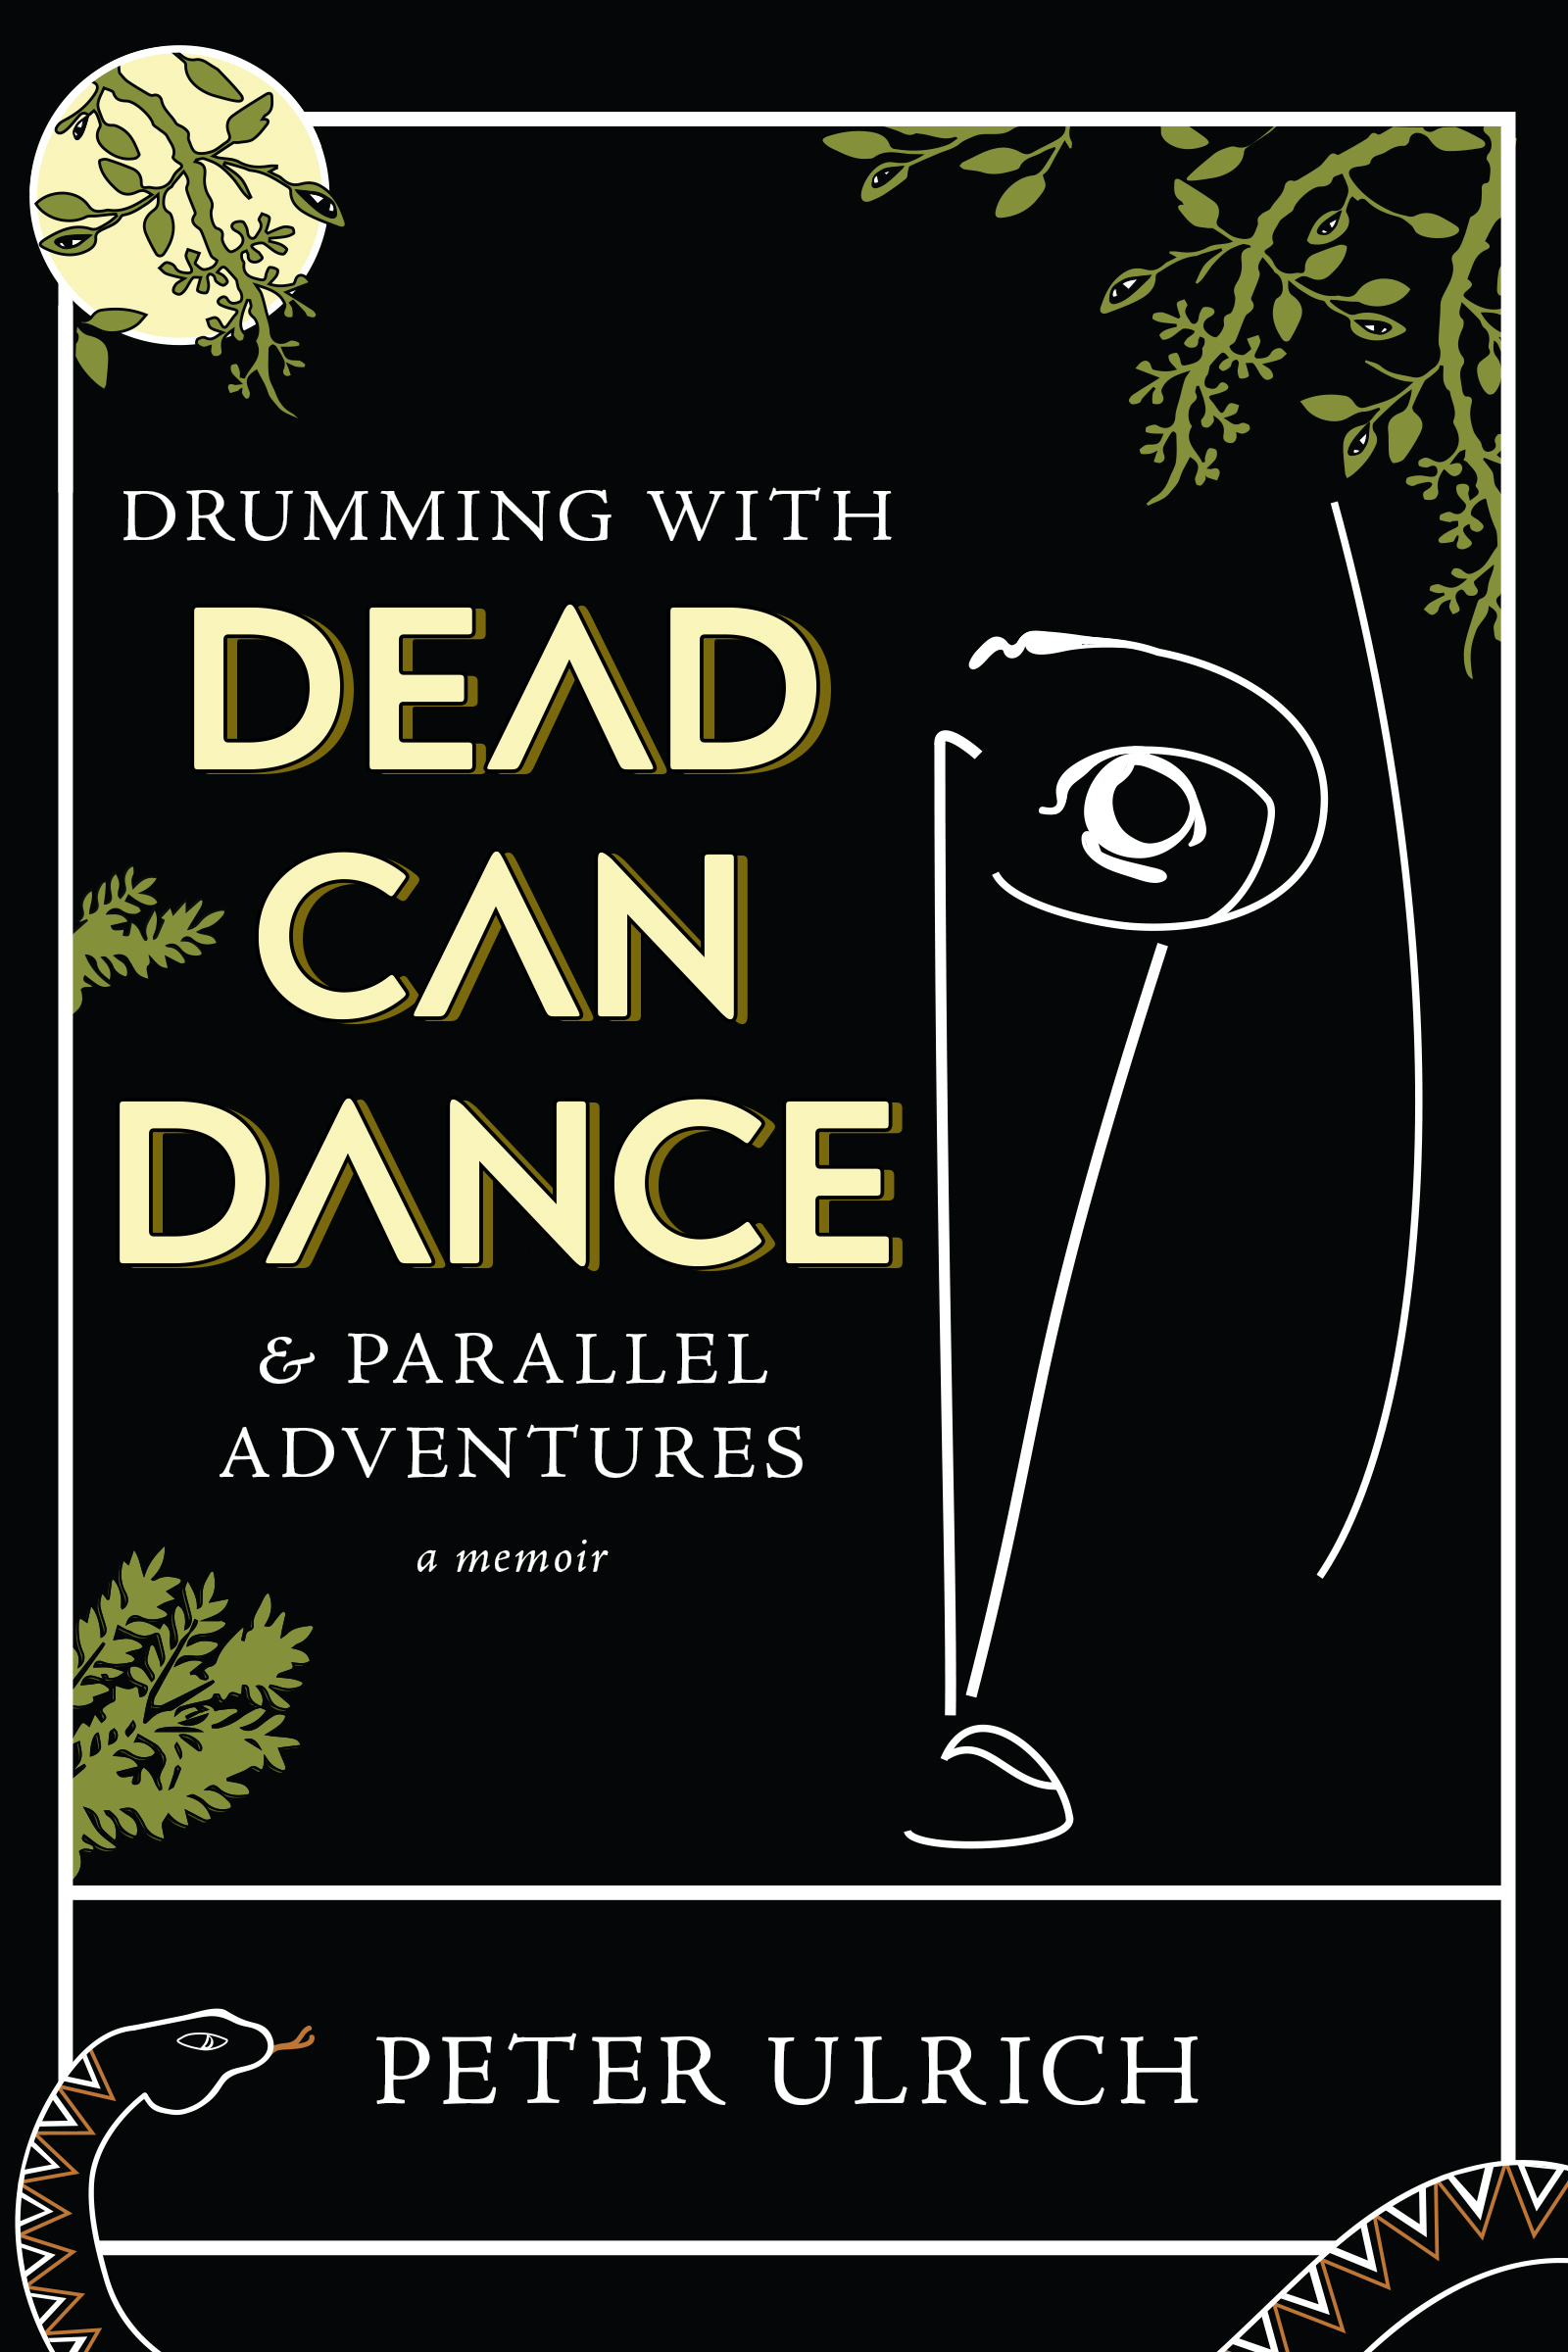 A black book cover featuring a moon in the upper left corner and leafy branches in the upper right and lower left covers, with a line graphic image depicting imagery from the band Dead Can Dance, with text reading "Drumming with Dead Can Dance and Parallel Adventures, a Memoir by Peter Ulrich" as a diamond-back snake emerges from the bottom of the graphic